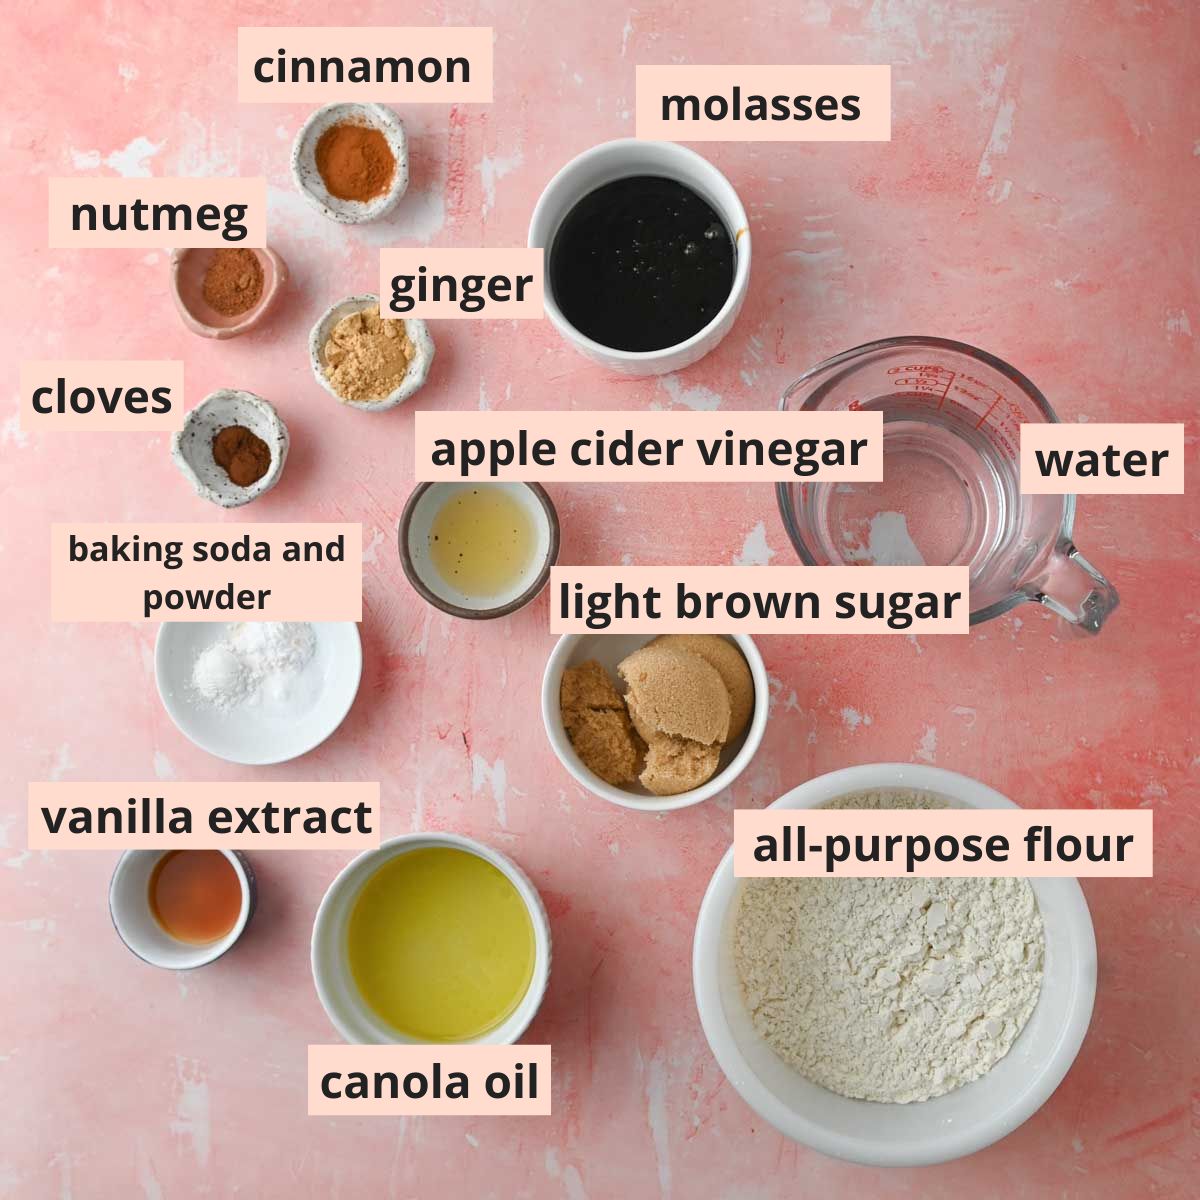 Labeled ingredients used to make gingerbread loaf.